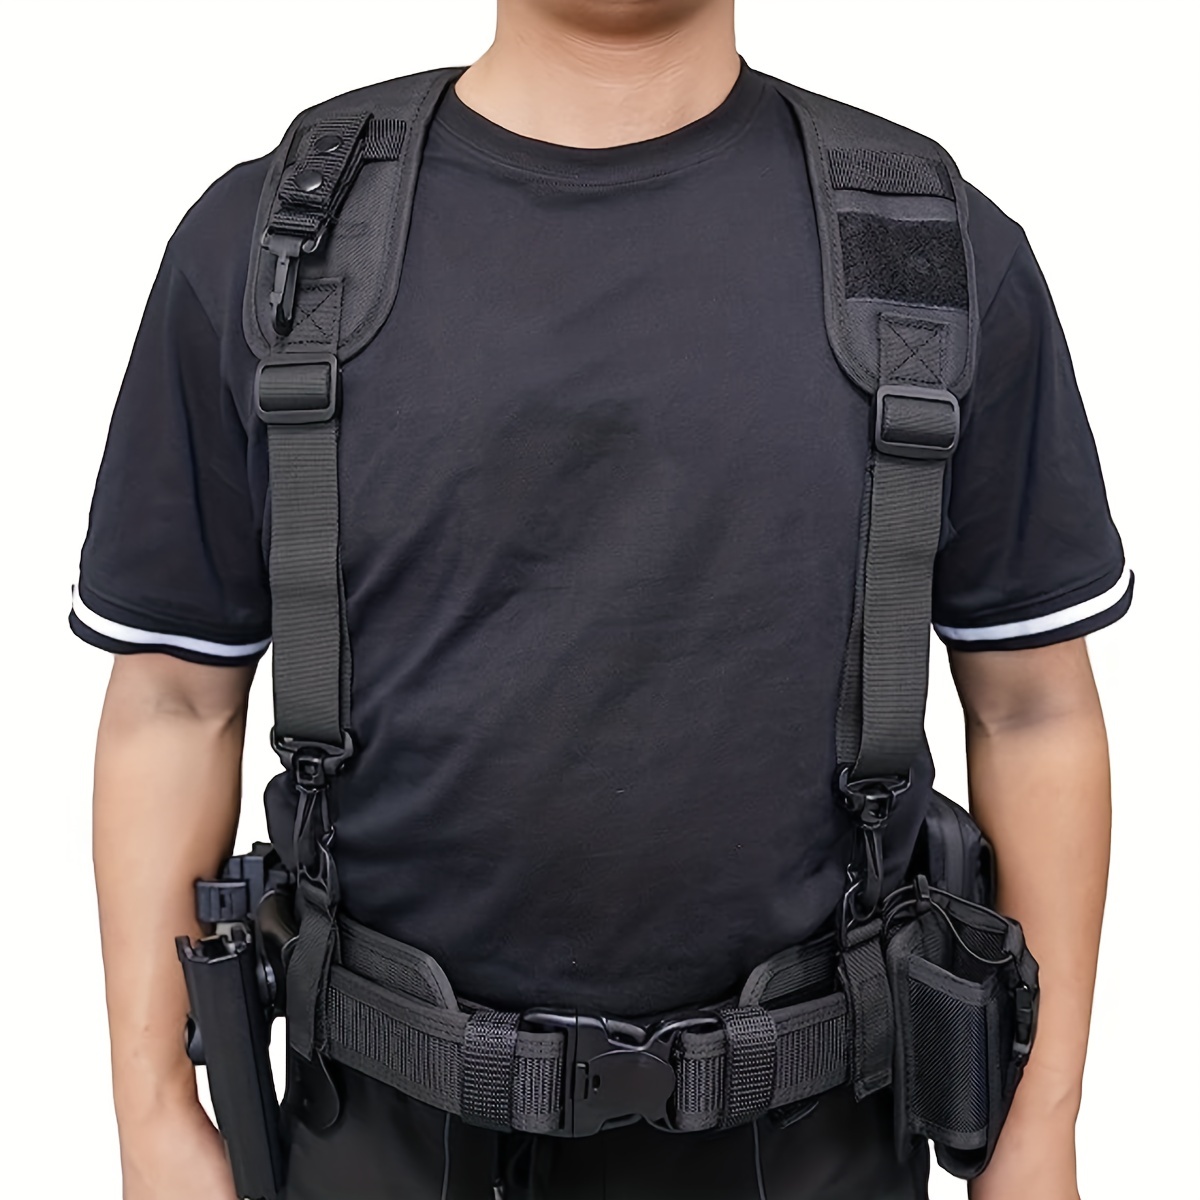 Tactical Suspenders Duty Belt Harness Padded Adjustable Tool Belt Suspenders  With Key Holder Ideal Choice For Gifts, Shop The Latest Trends